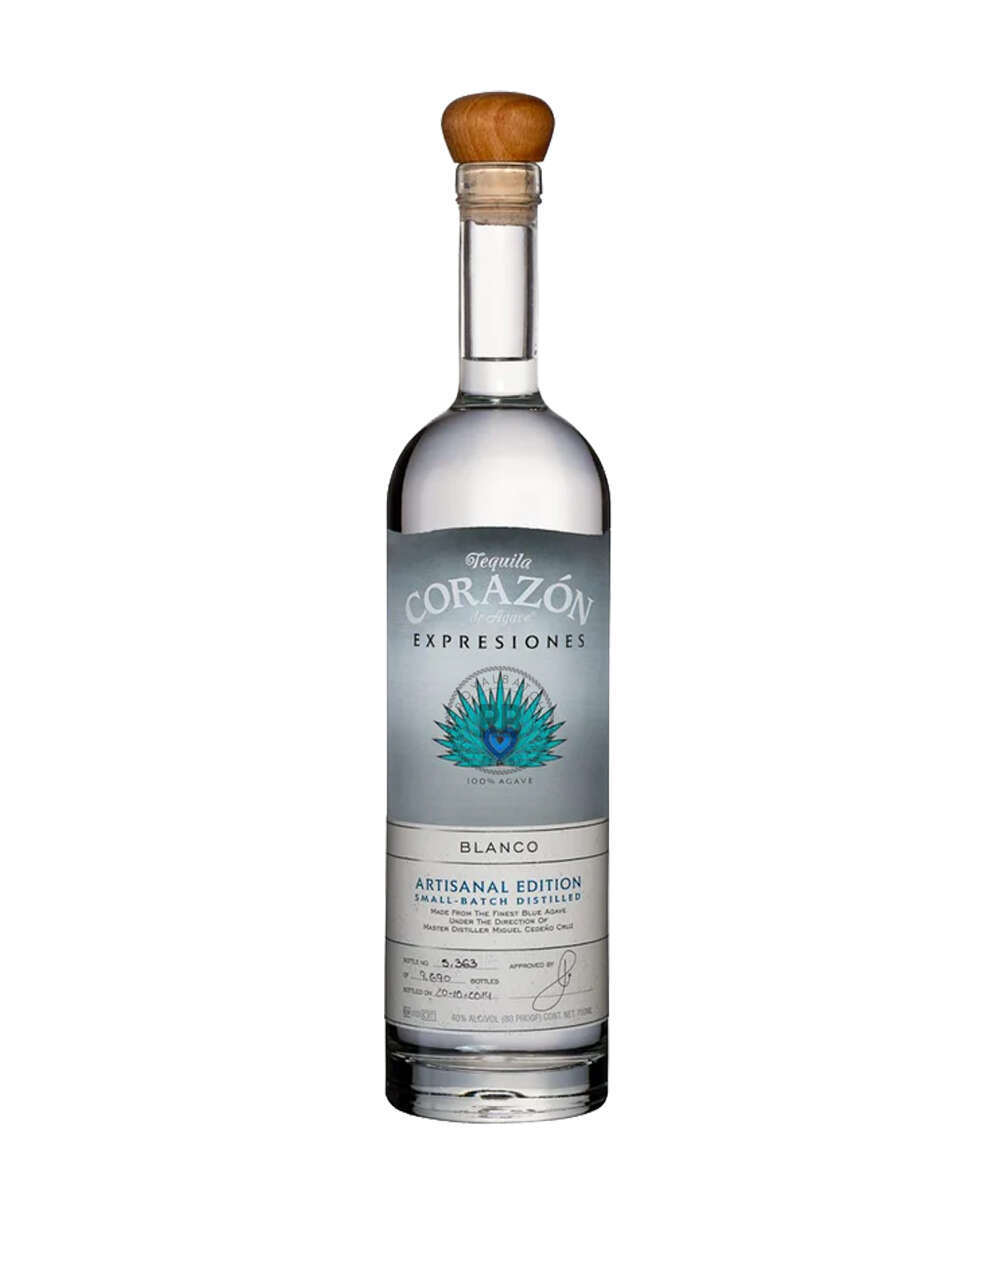 Corazon Expresiones Blanco Artisanal Edition Small Batch Distilled Tequila 2014